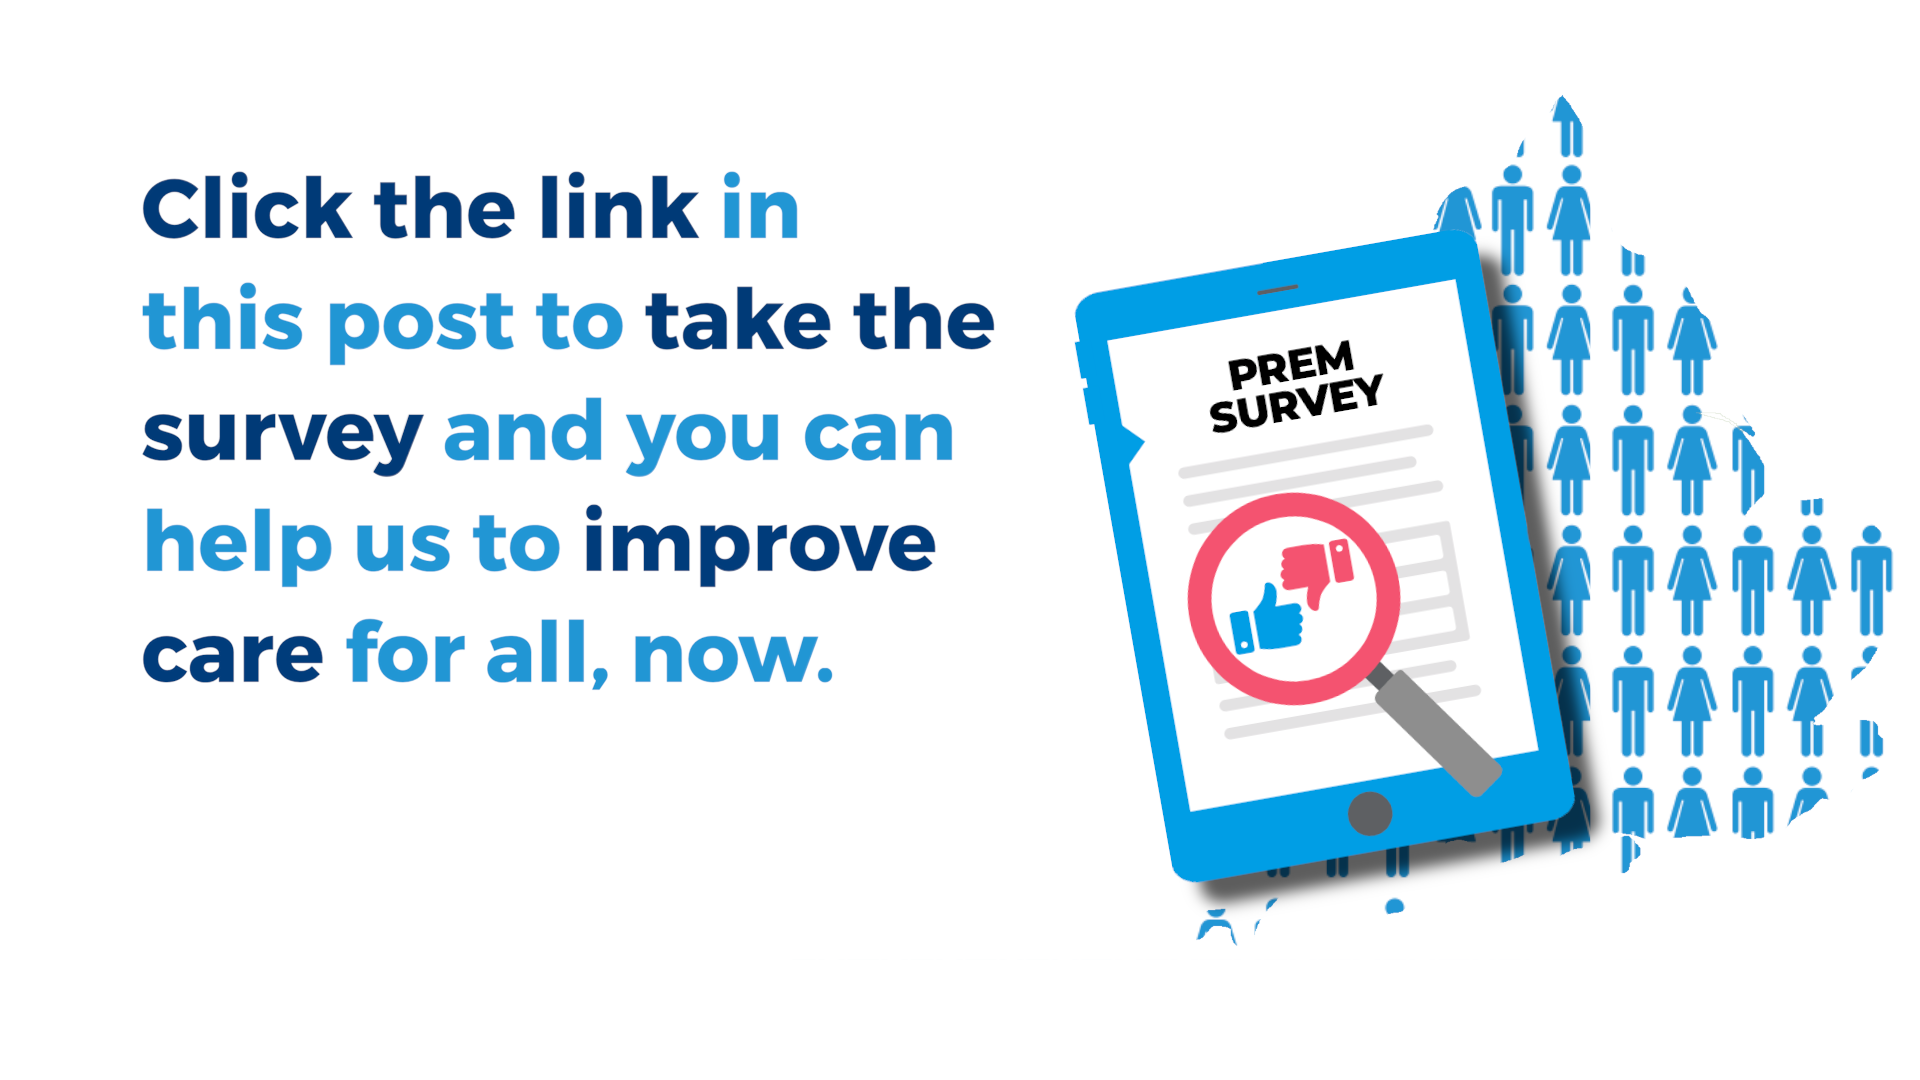 Share your experiences of care by taking this short PREM survey.